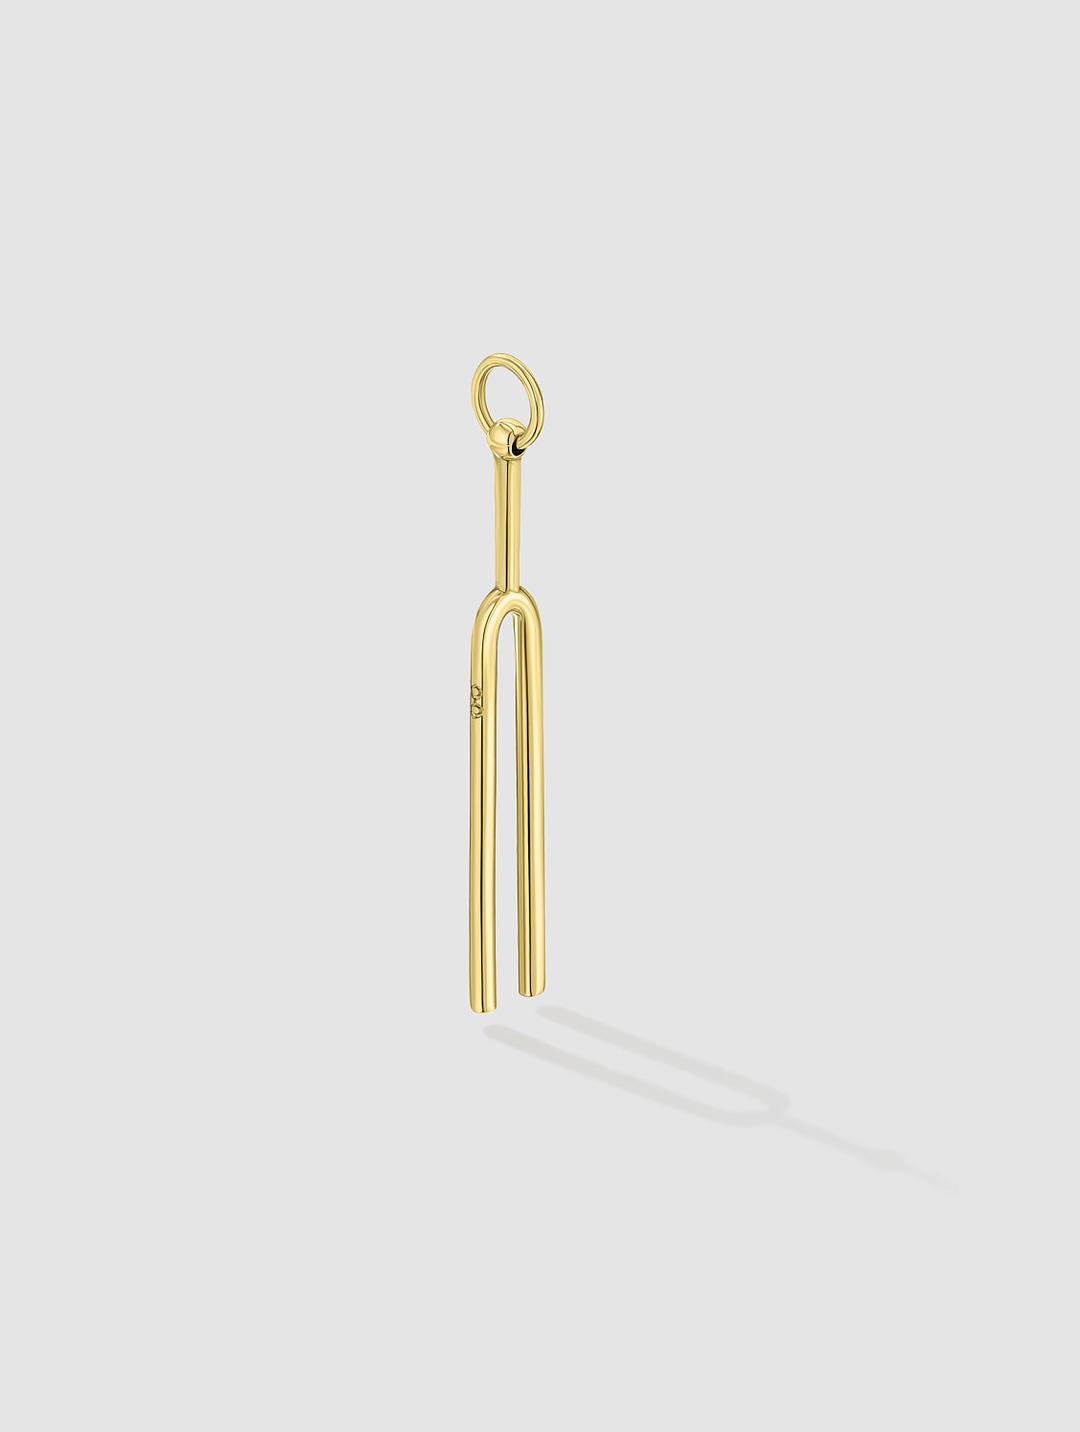 The Pitchfork Trinket With Gold Plating